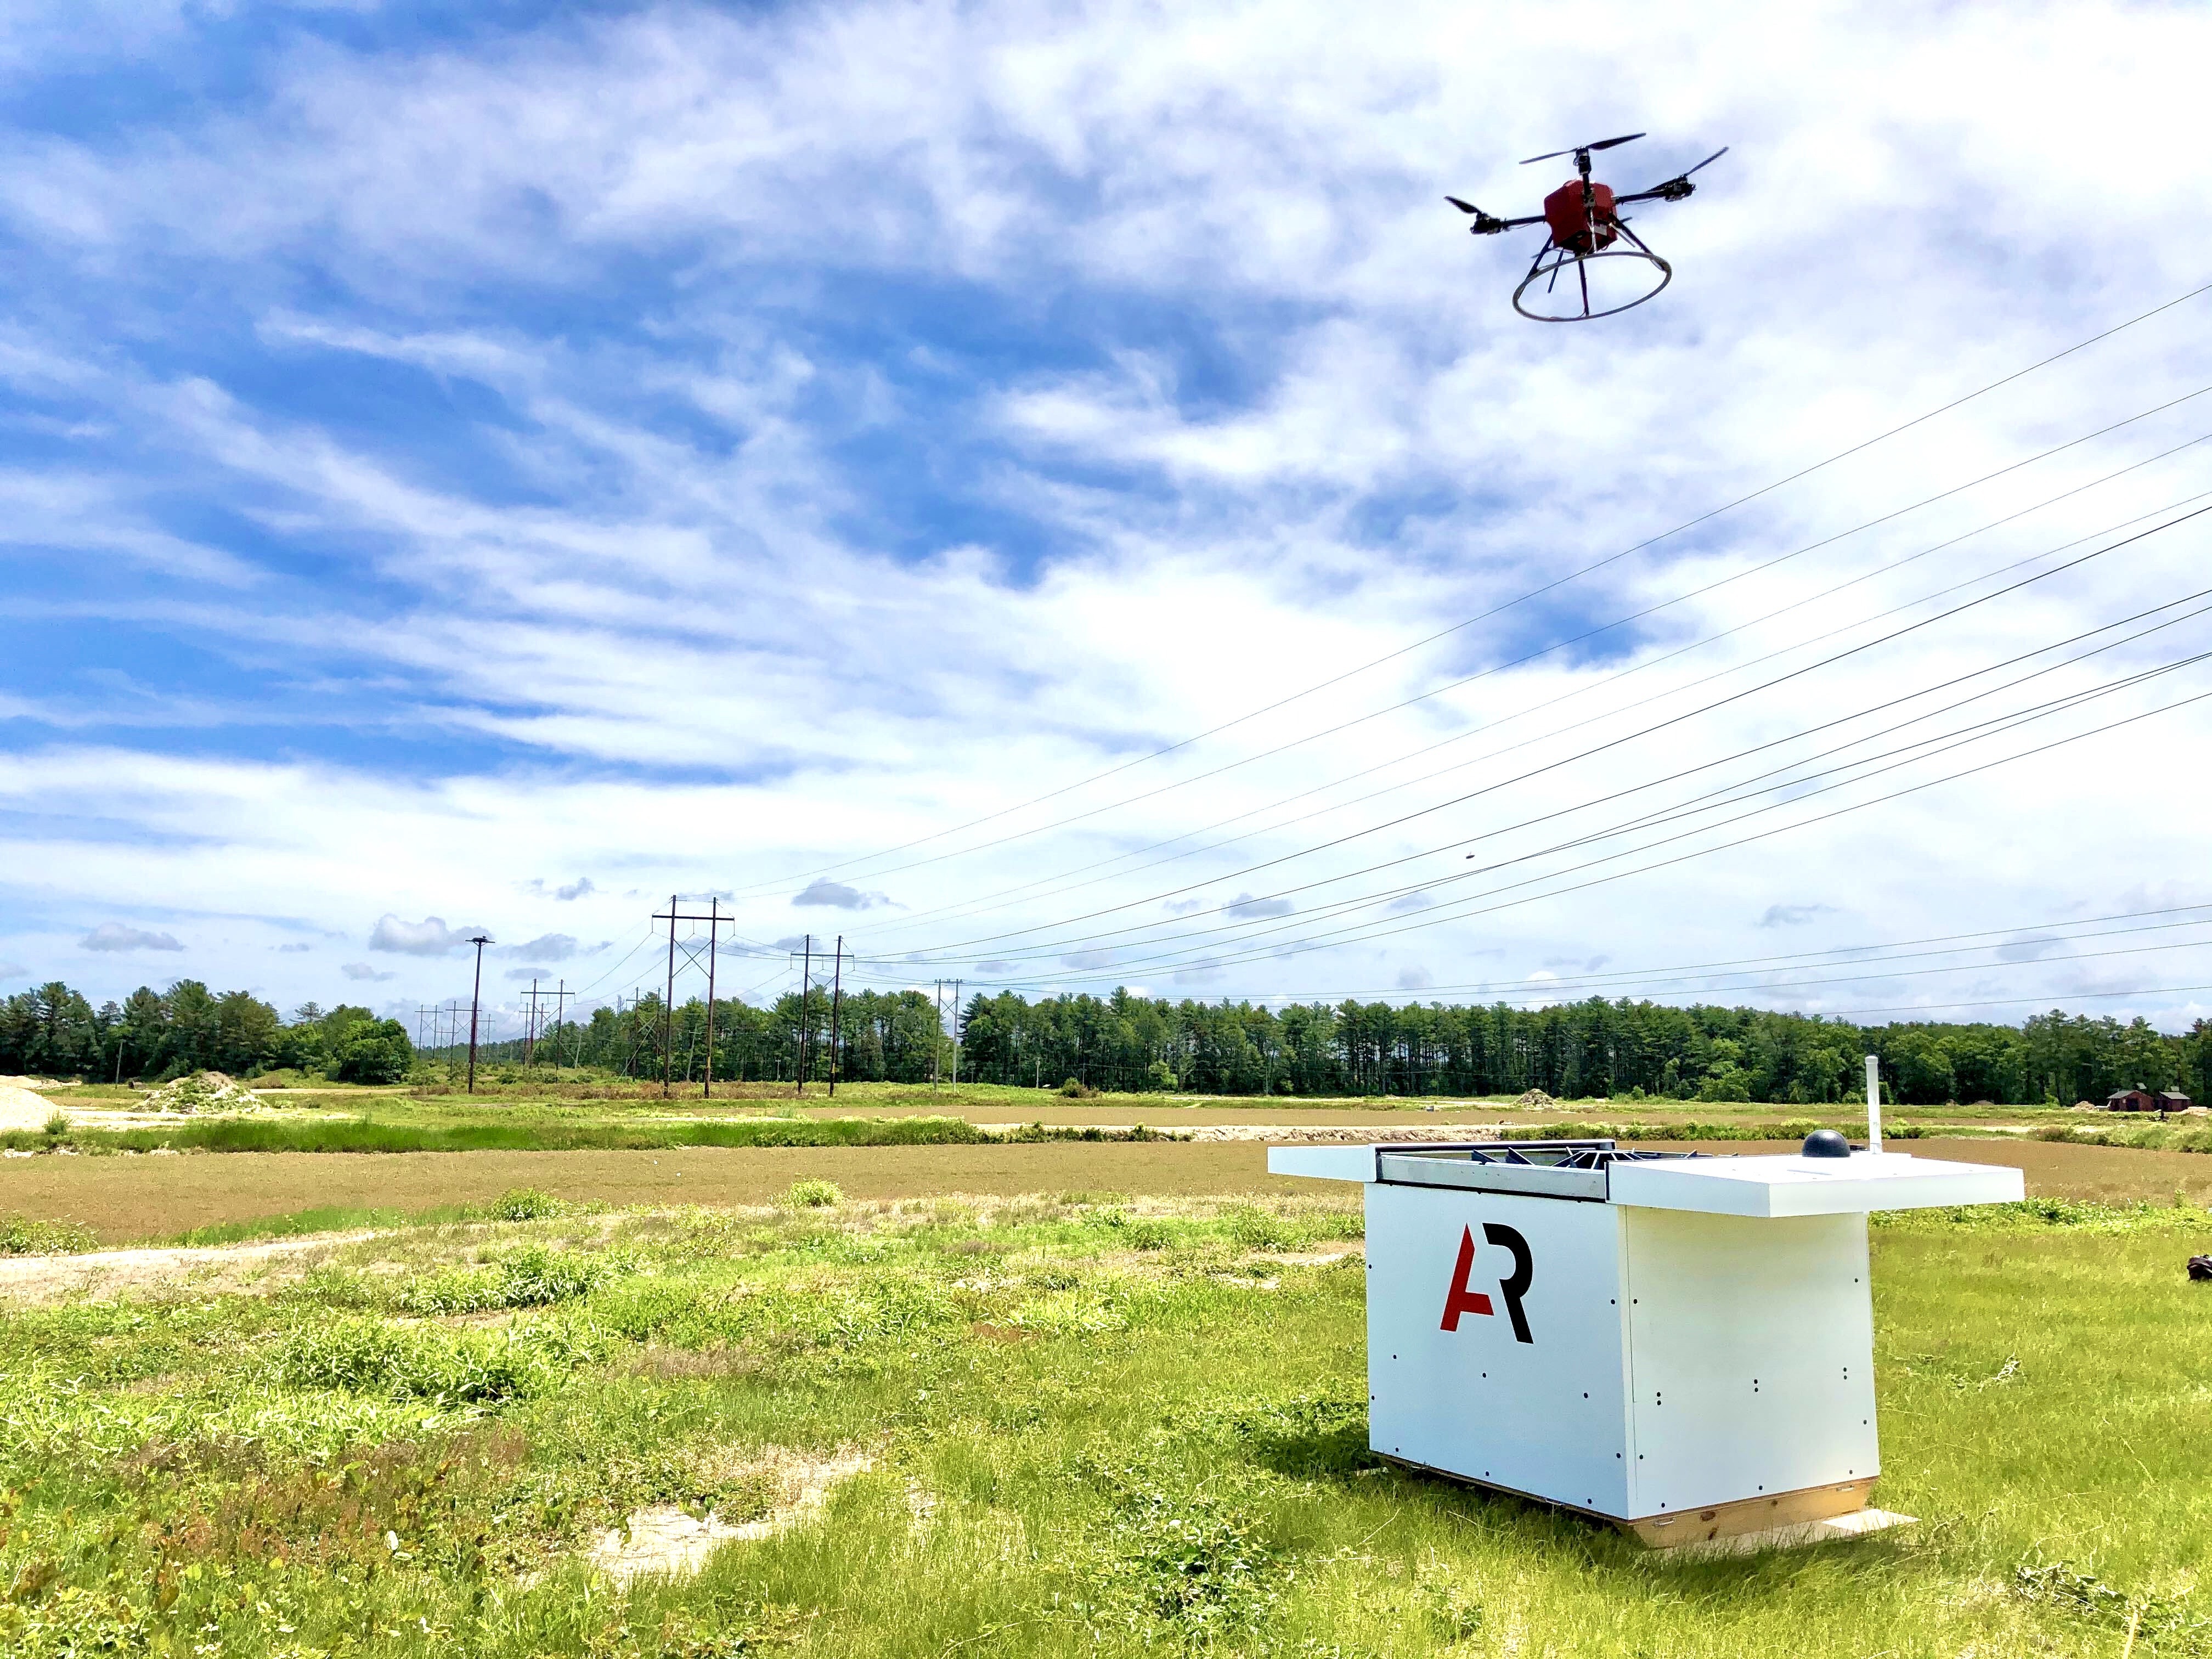 American Robotics Becomes First Company Approved By The Faa To Operate Automated Drones Without Human Operators On Site Business Wire